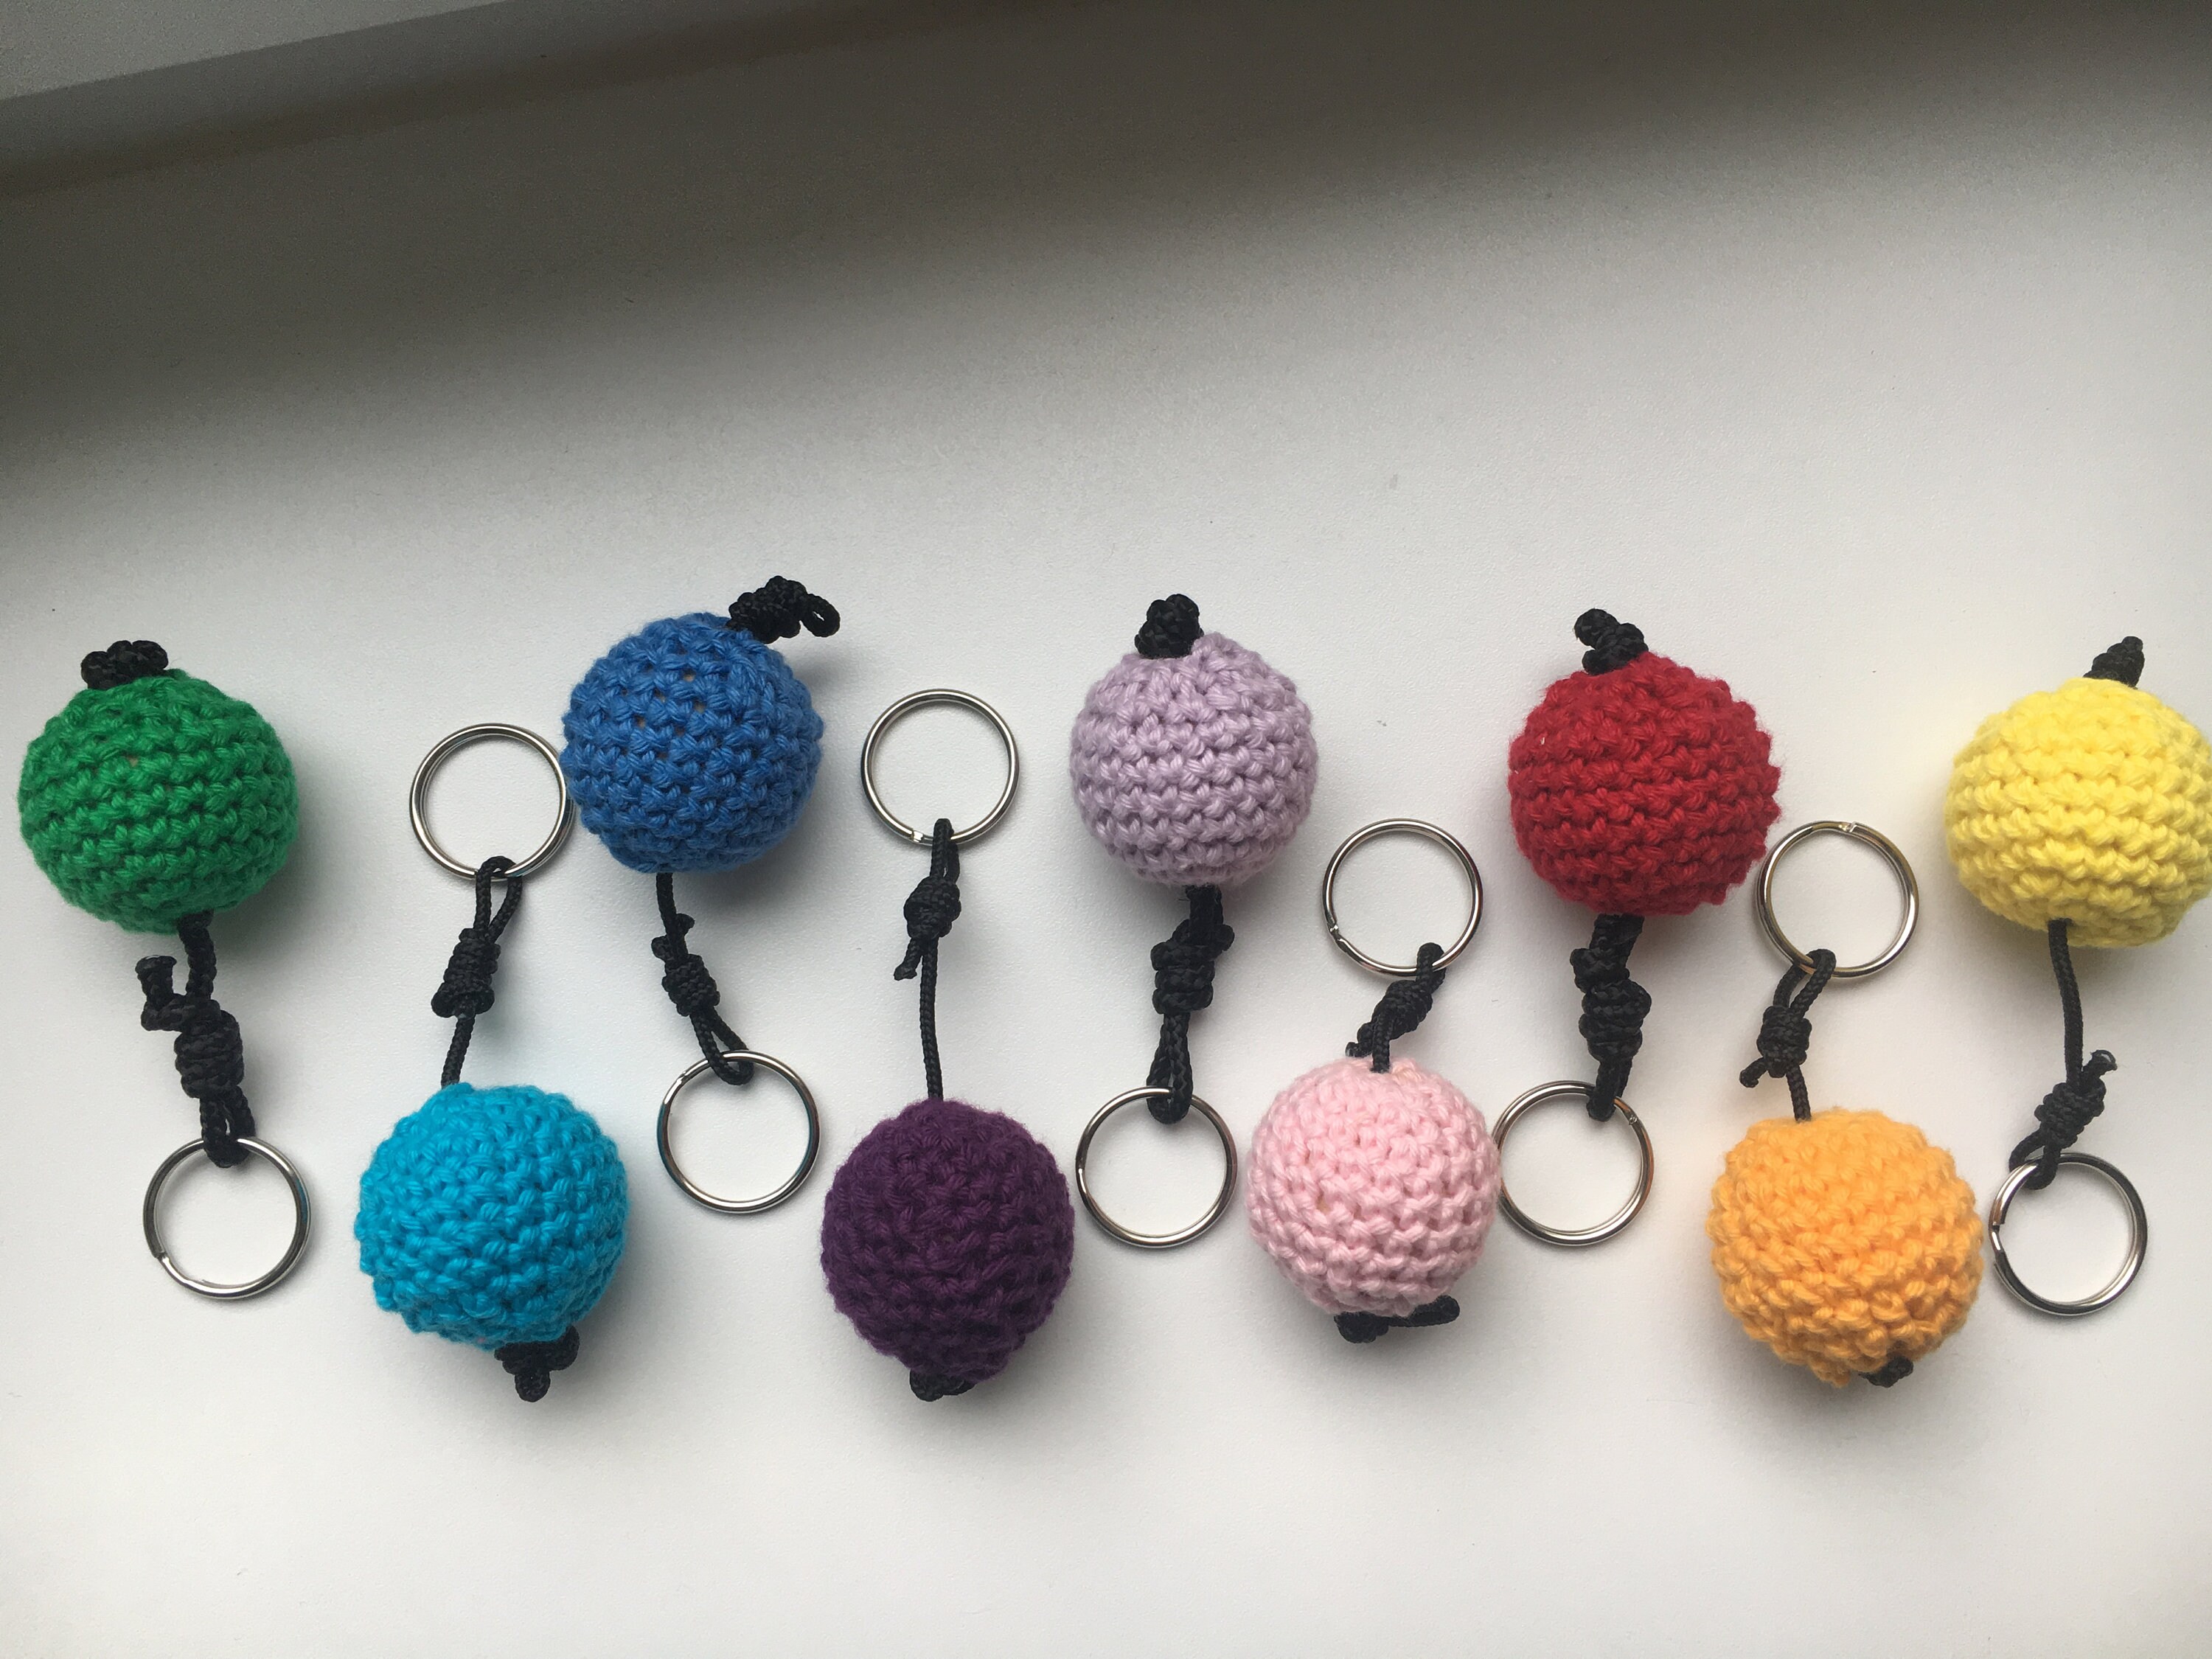 Buy Golf Ball Keychain Online In India - Etsy India